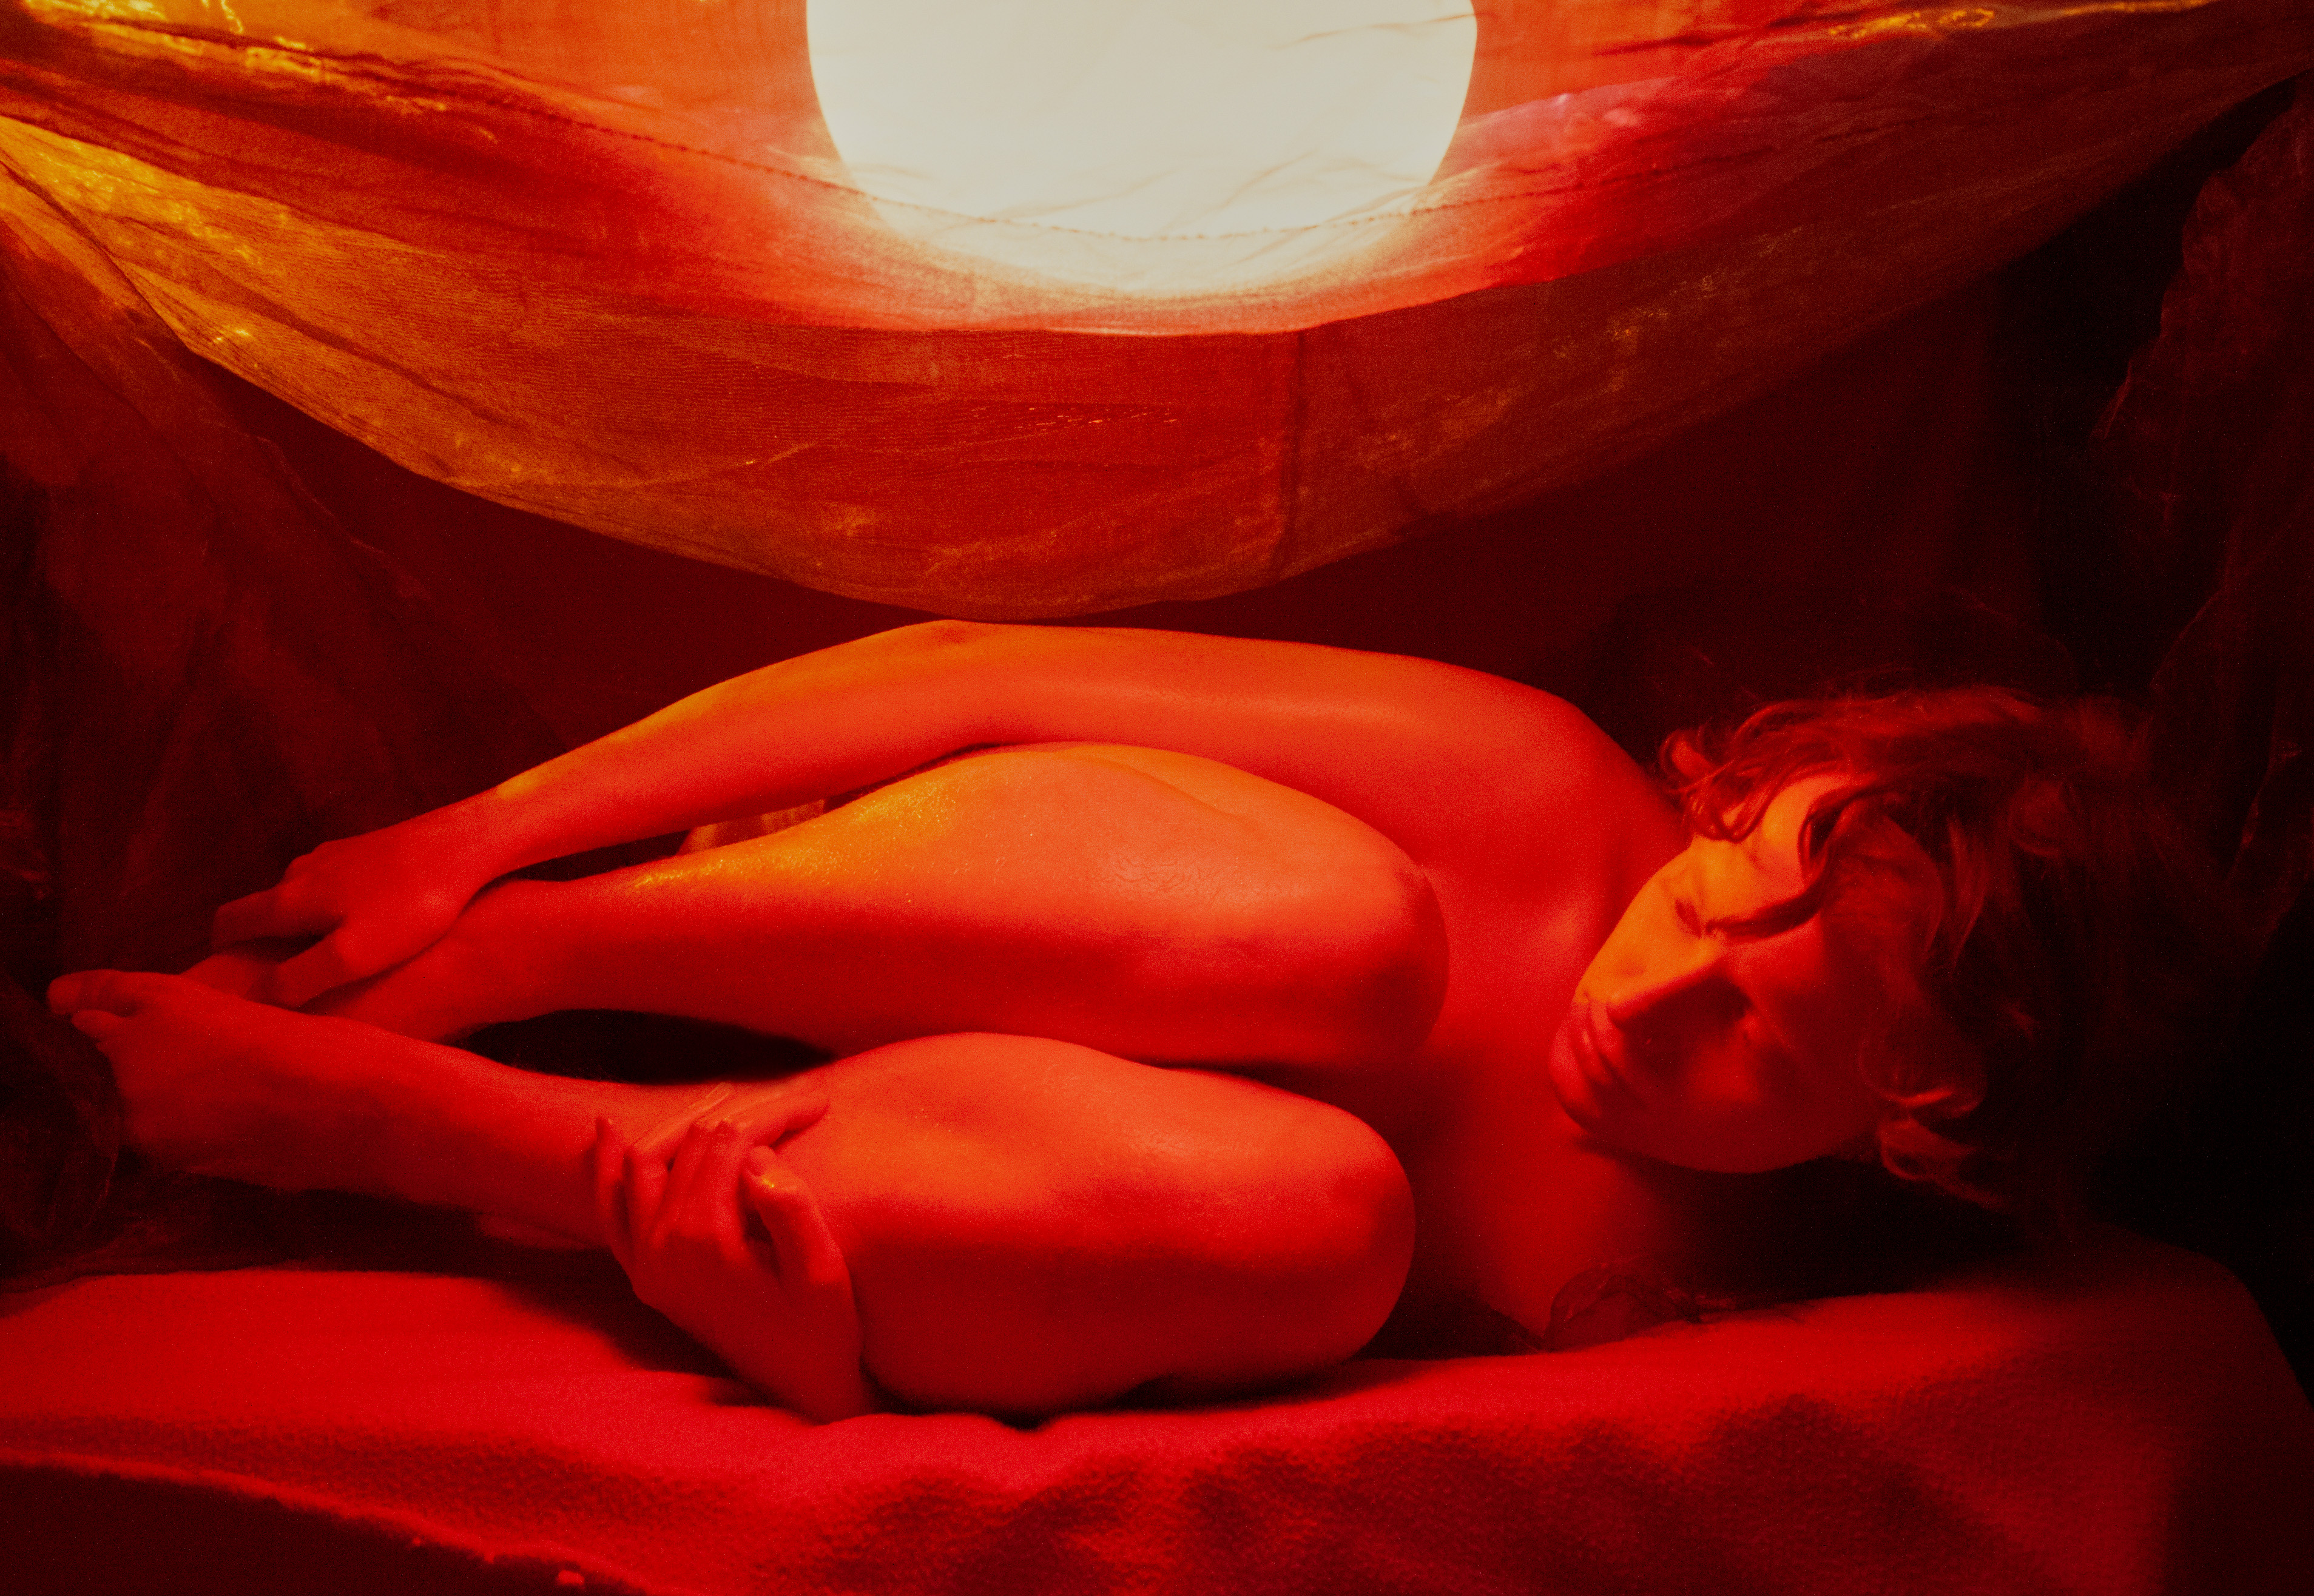 Flo Verhulst – image of a young person in fetal position surrounded by blankets, lit by a red light